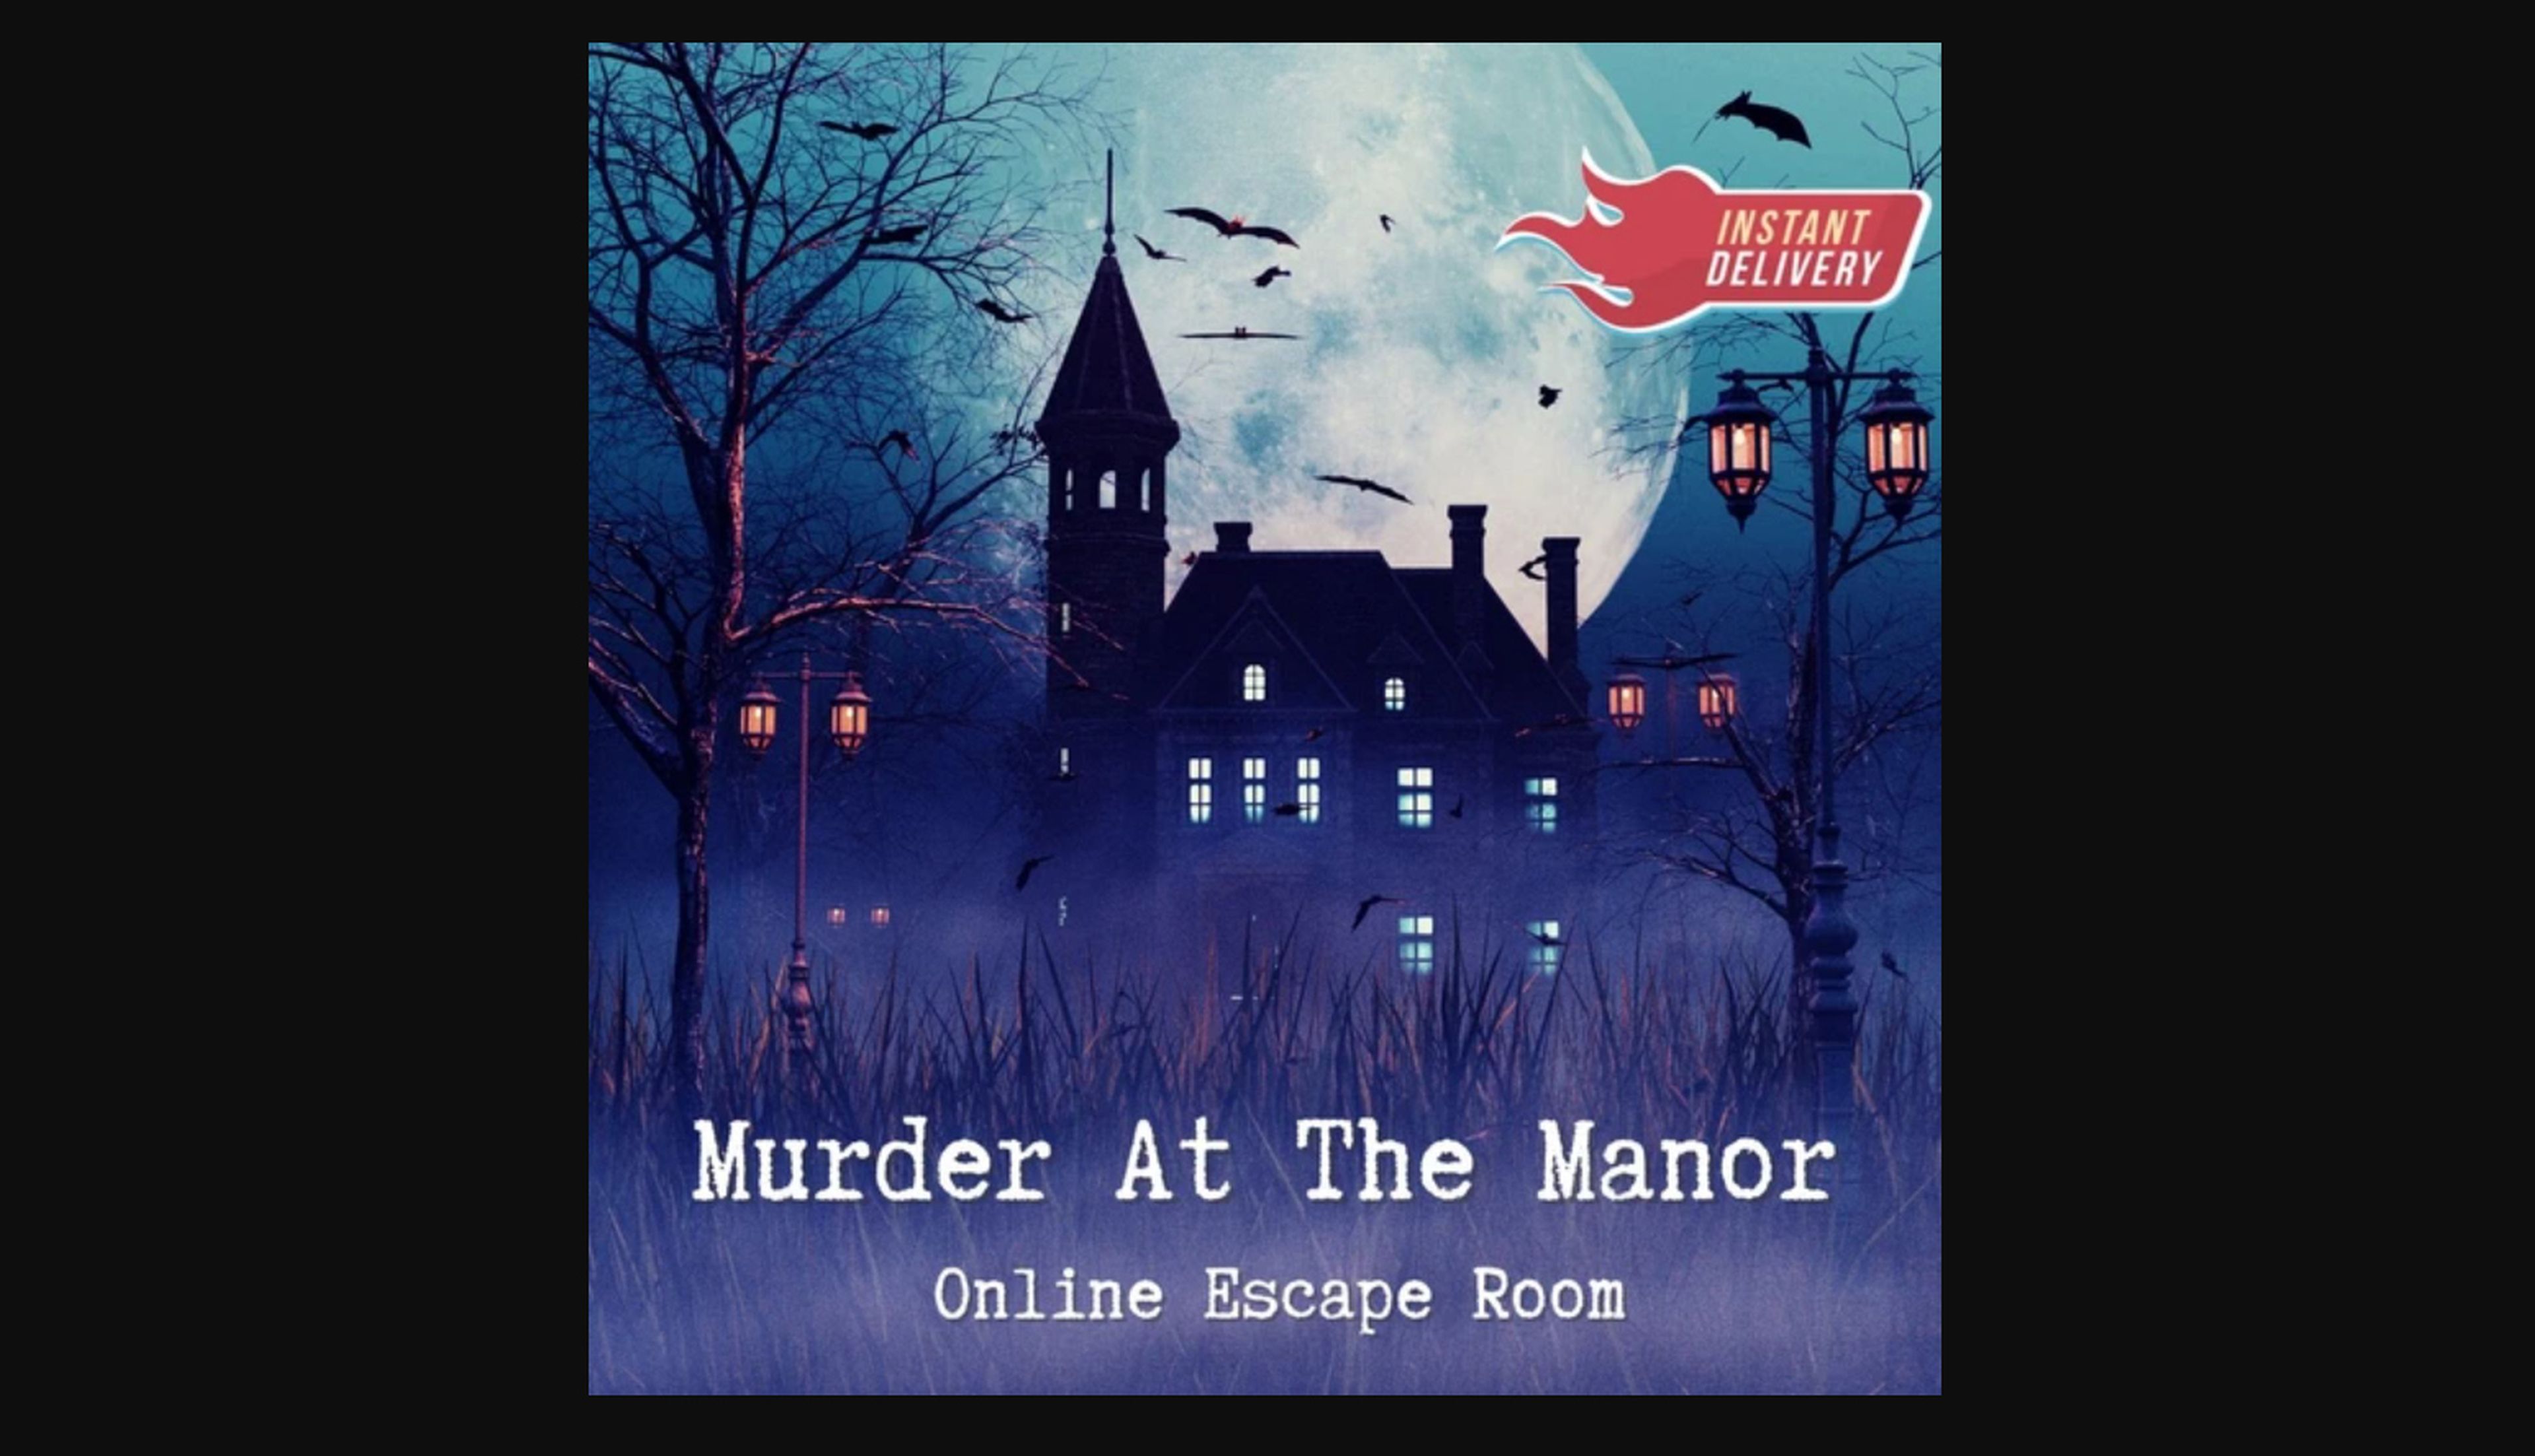 Murder at the Manor escape room